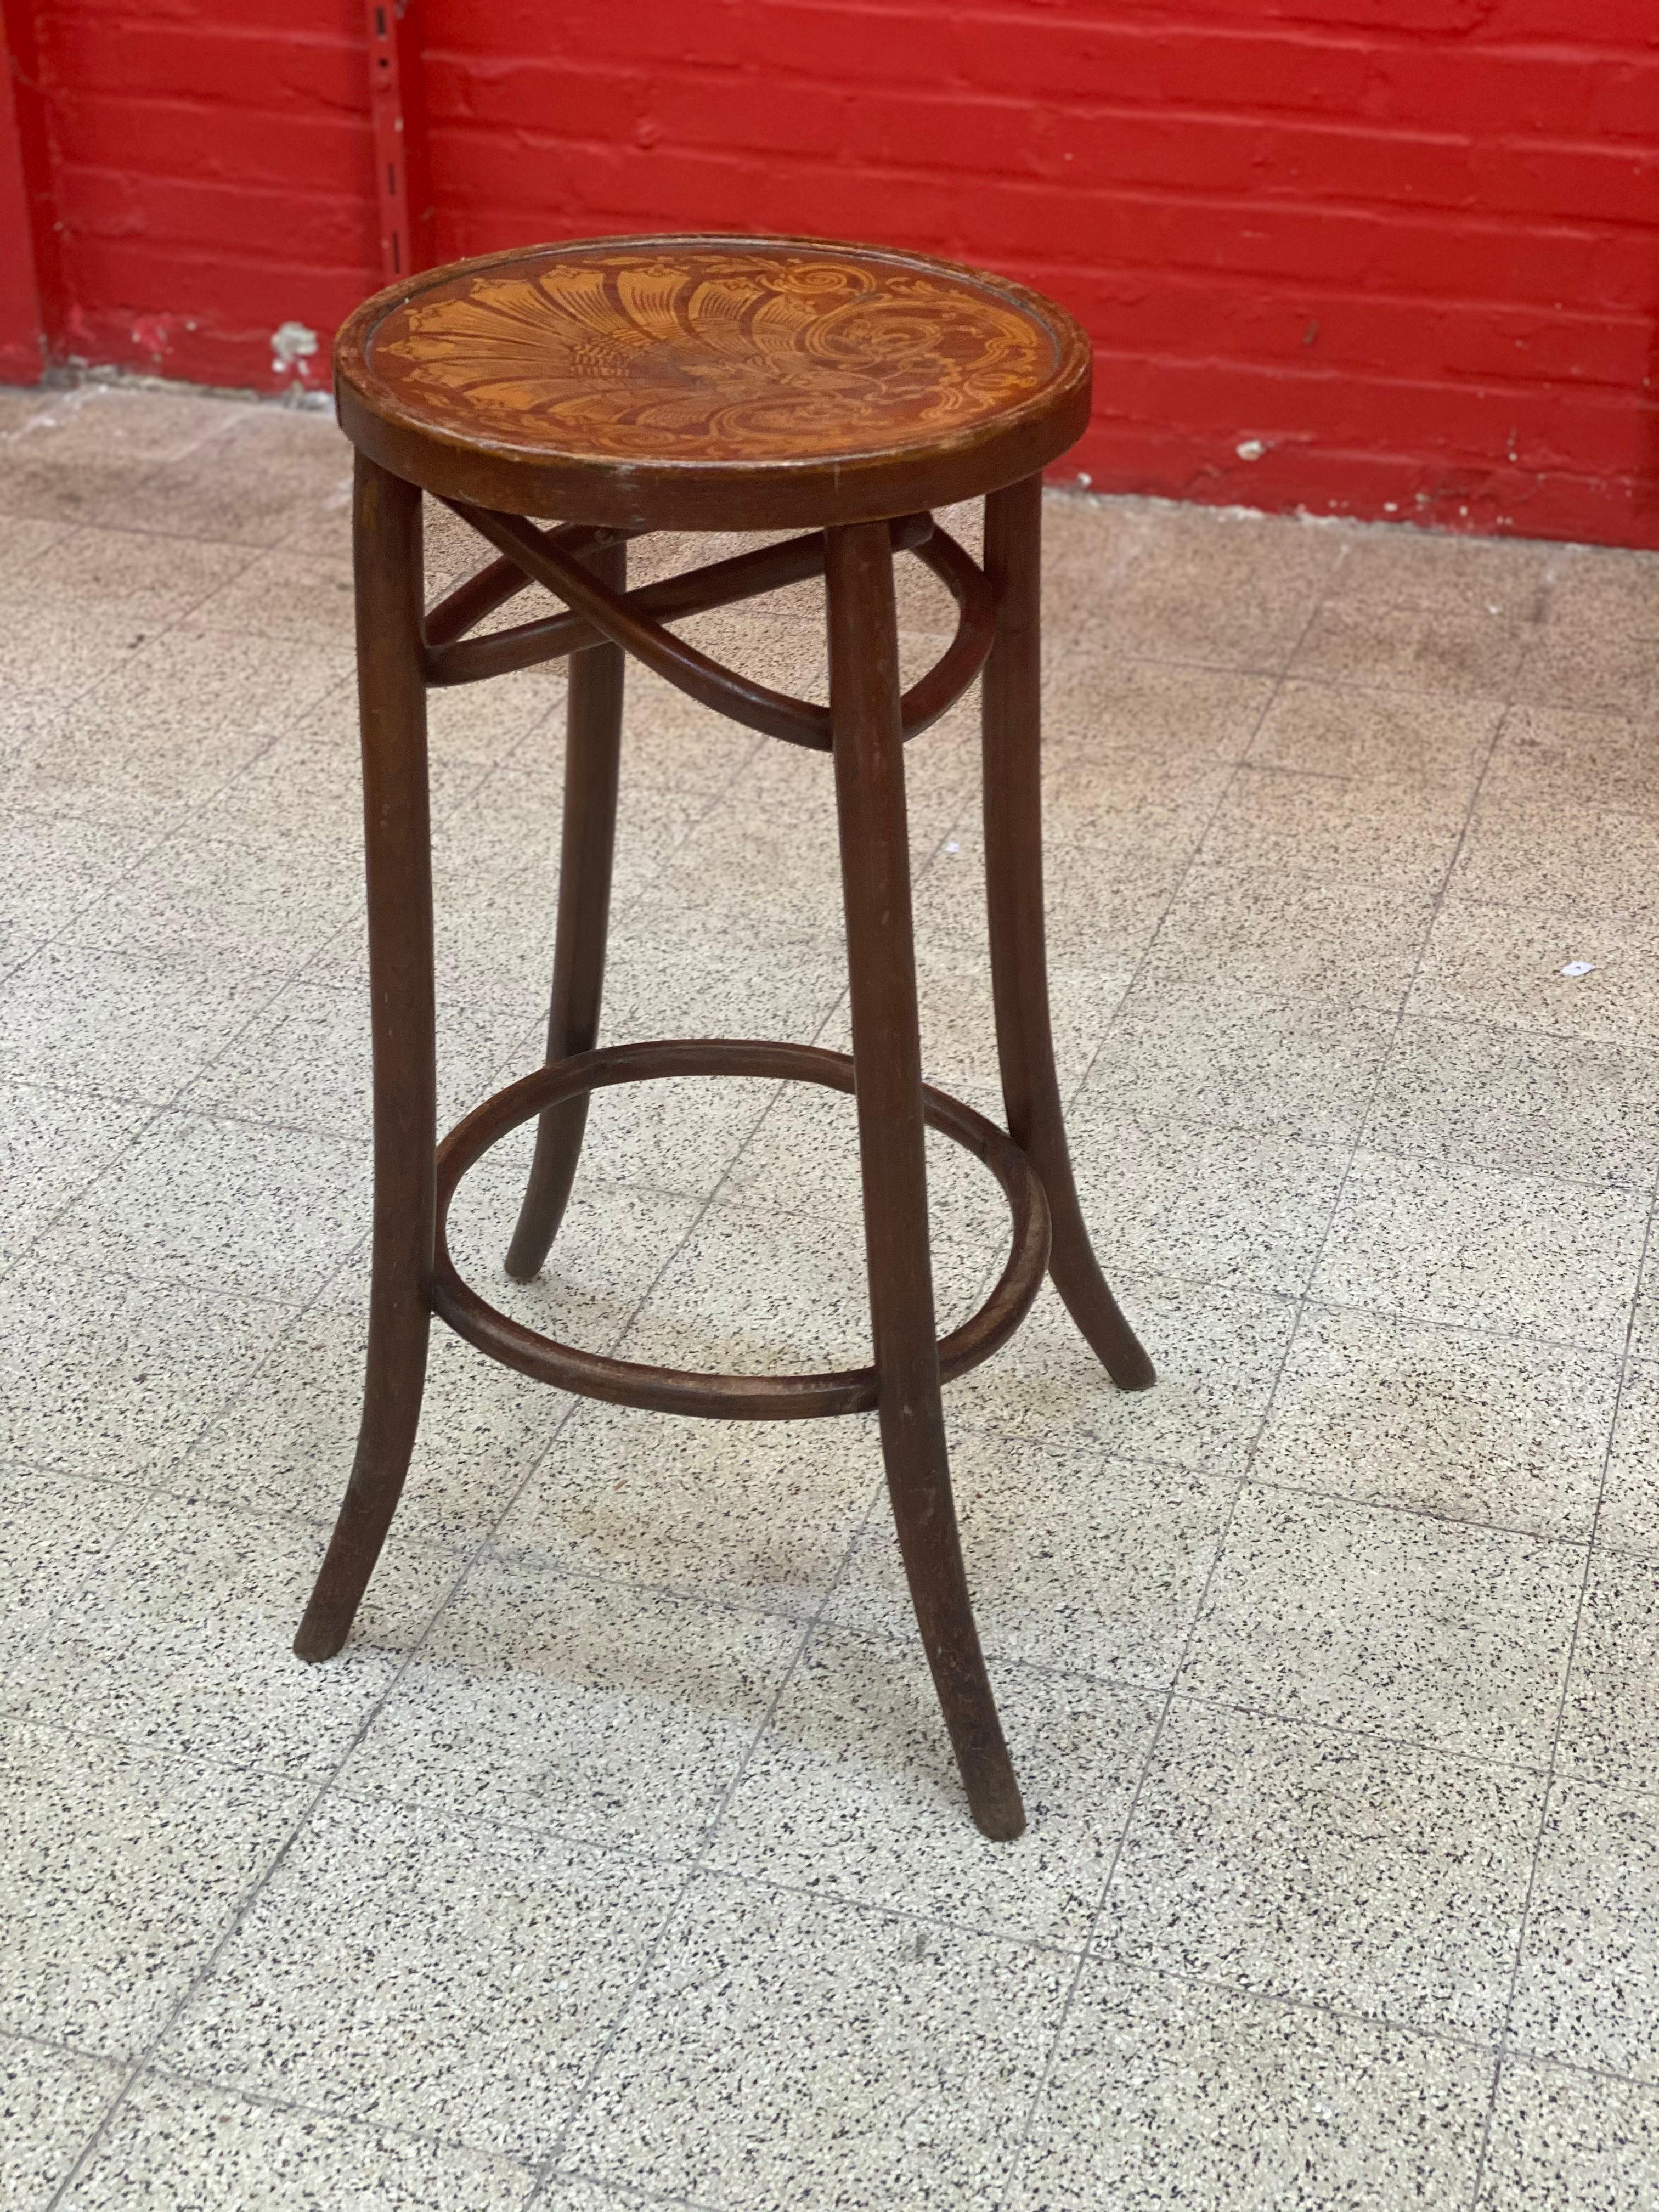 Art Nouveau Stool in the Style of Thonet, circa 1930 For Sale 4